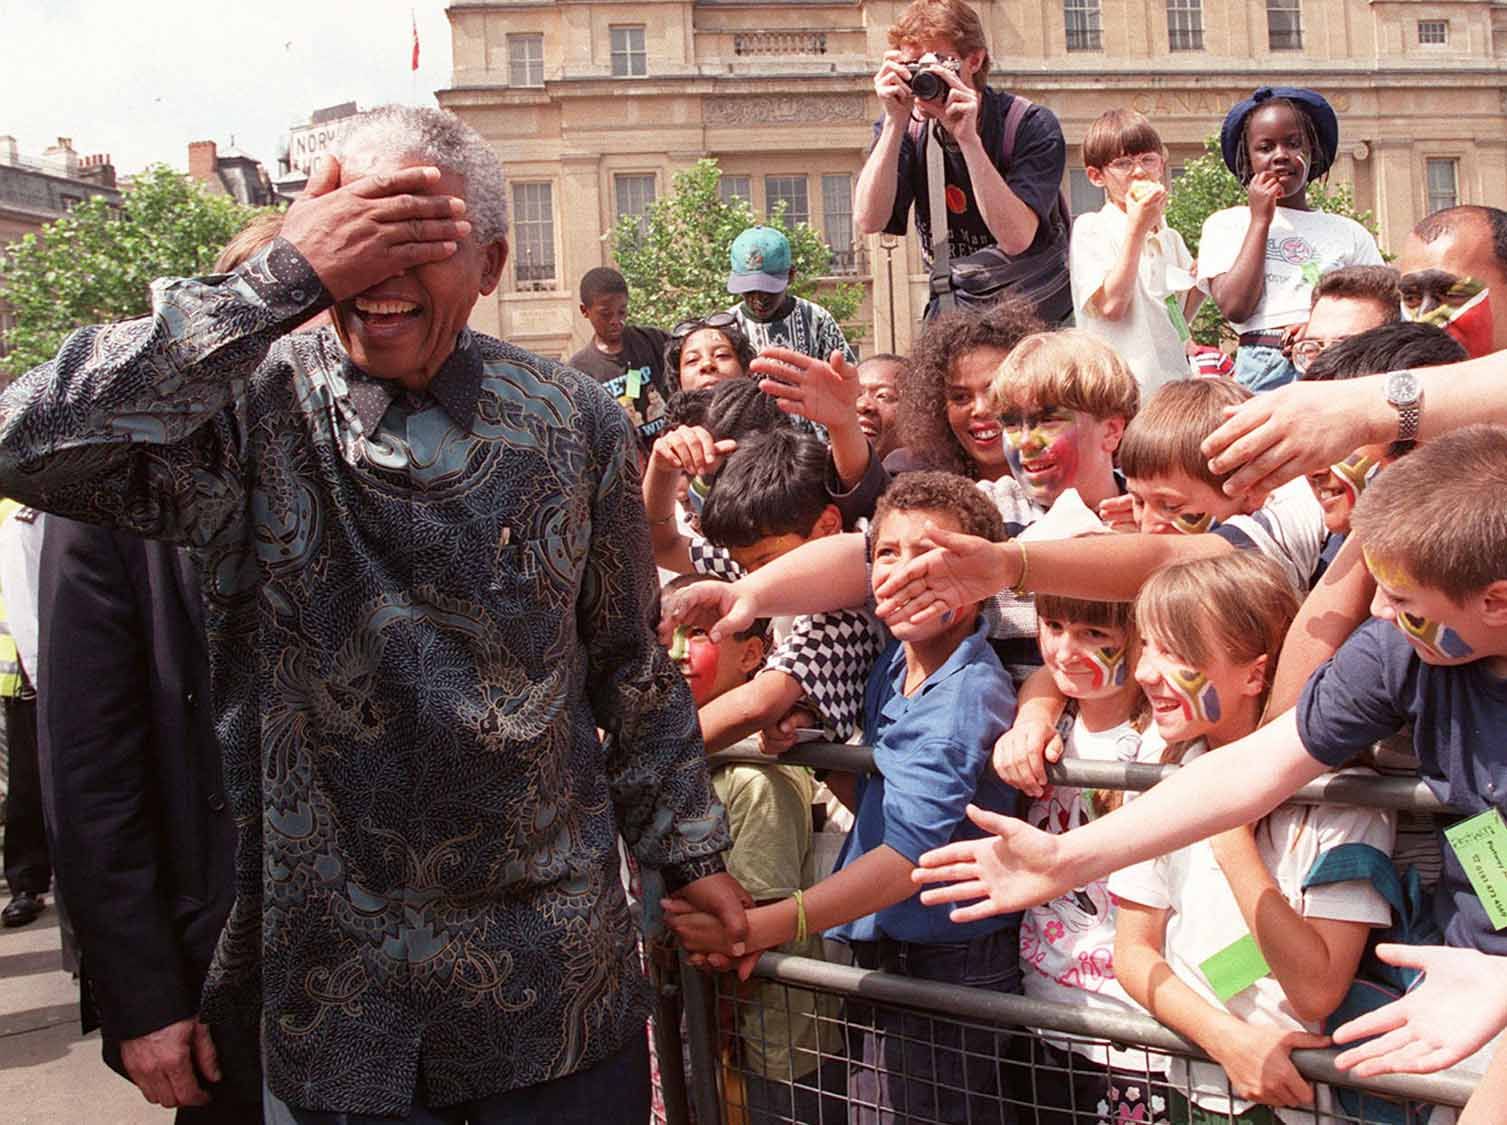 South Africa's President Nelson Mandela walks amongst the vast Trafalgar Square crowd in London on July 12 1996. The President later addressed the crowd from the balcony of South Africa House.